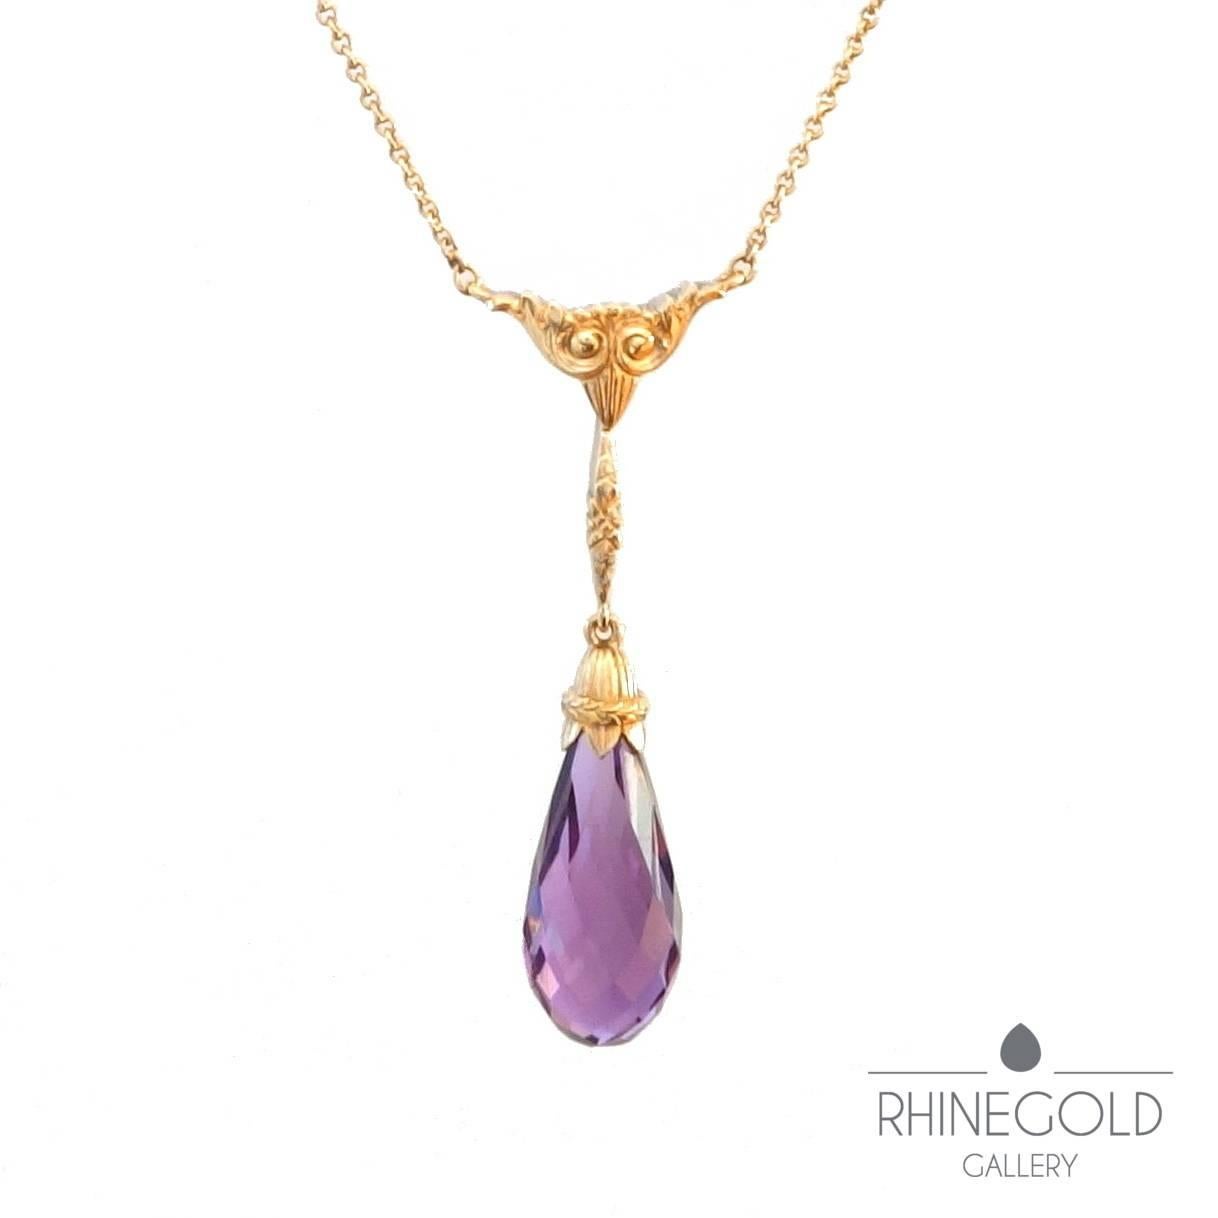 Antique Victorian Amethyst Gold Drop Necklace Lavaliere
14k yellow gold, amethyst
Length of chain 41 cm (approx. 16 1/8